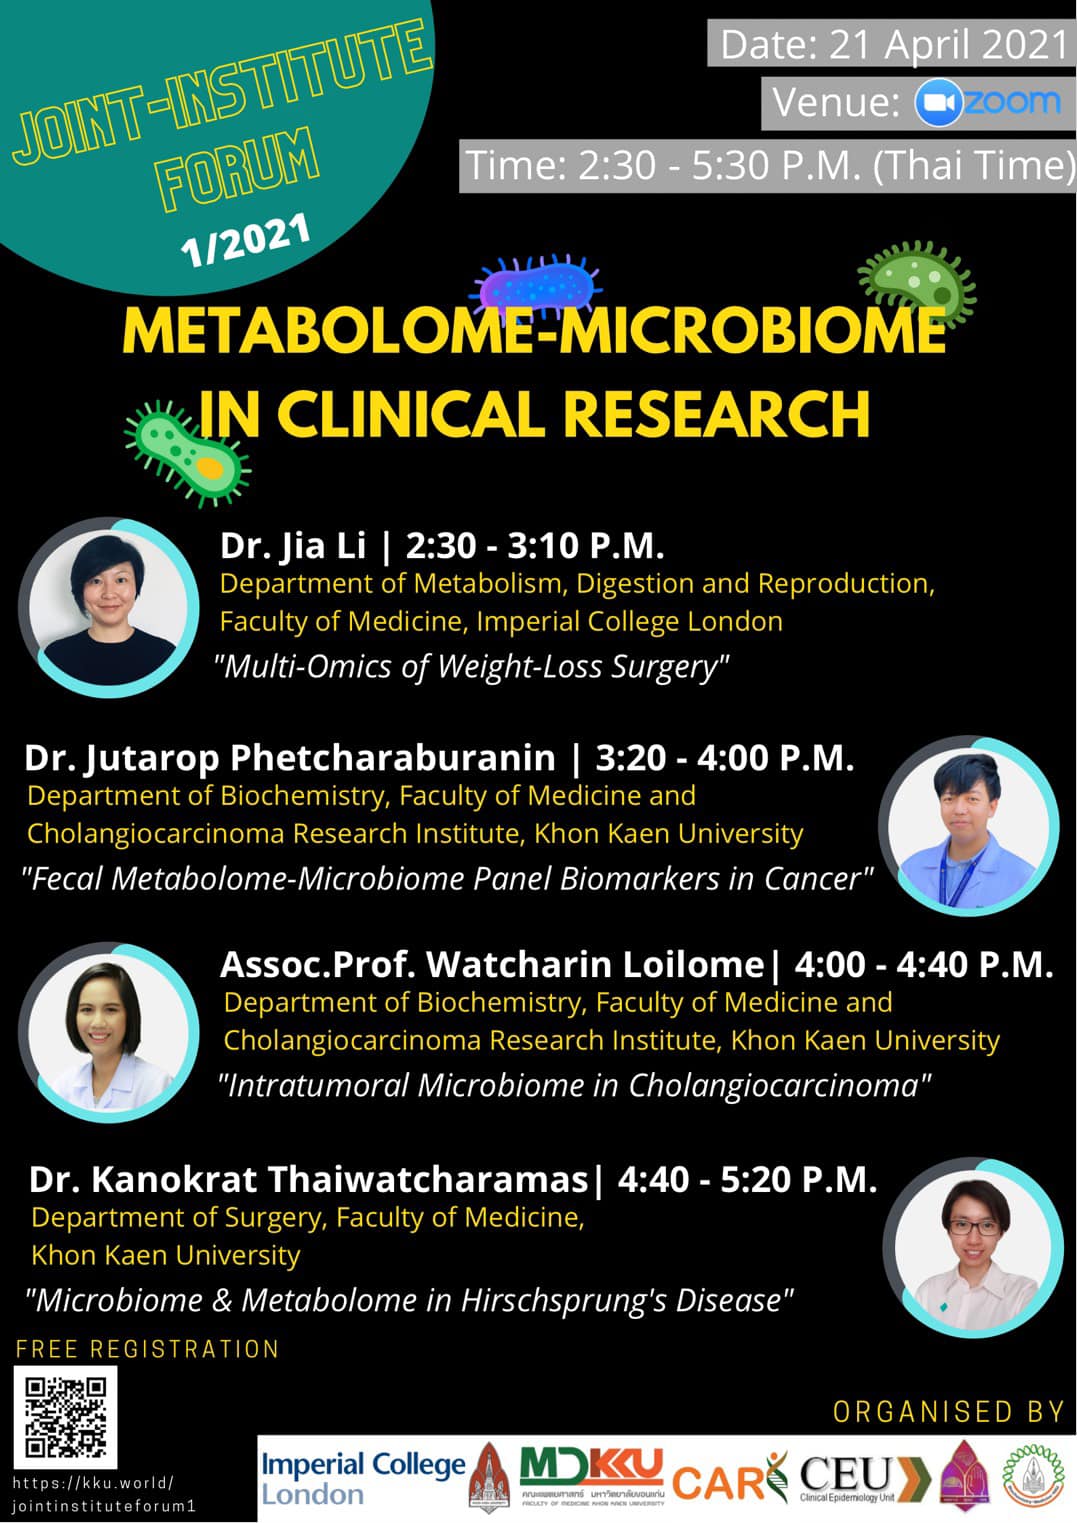 [Upcoming event] Joint-Institute Forum: Metabolome-Microbiome in Clinical Research